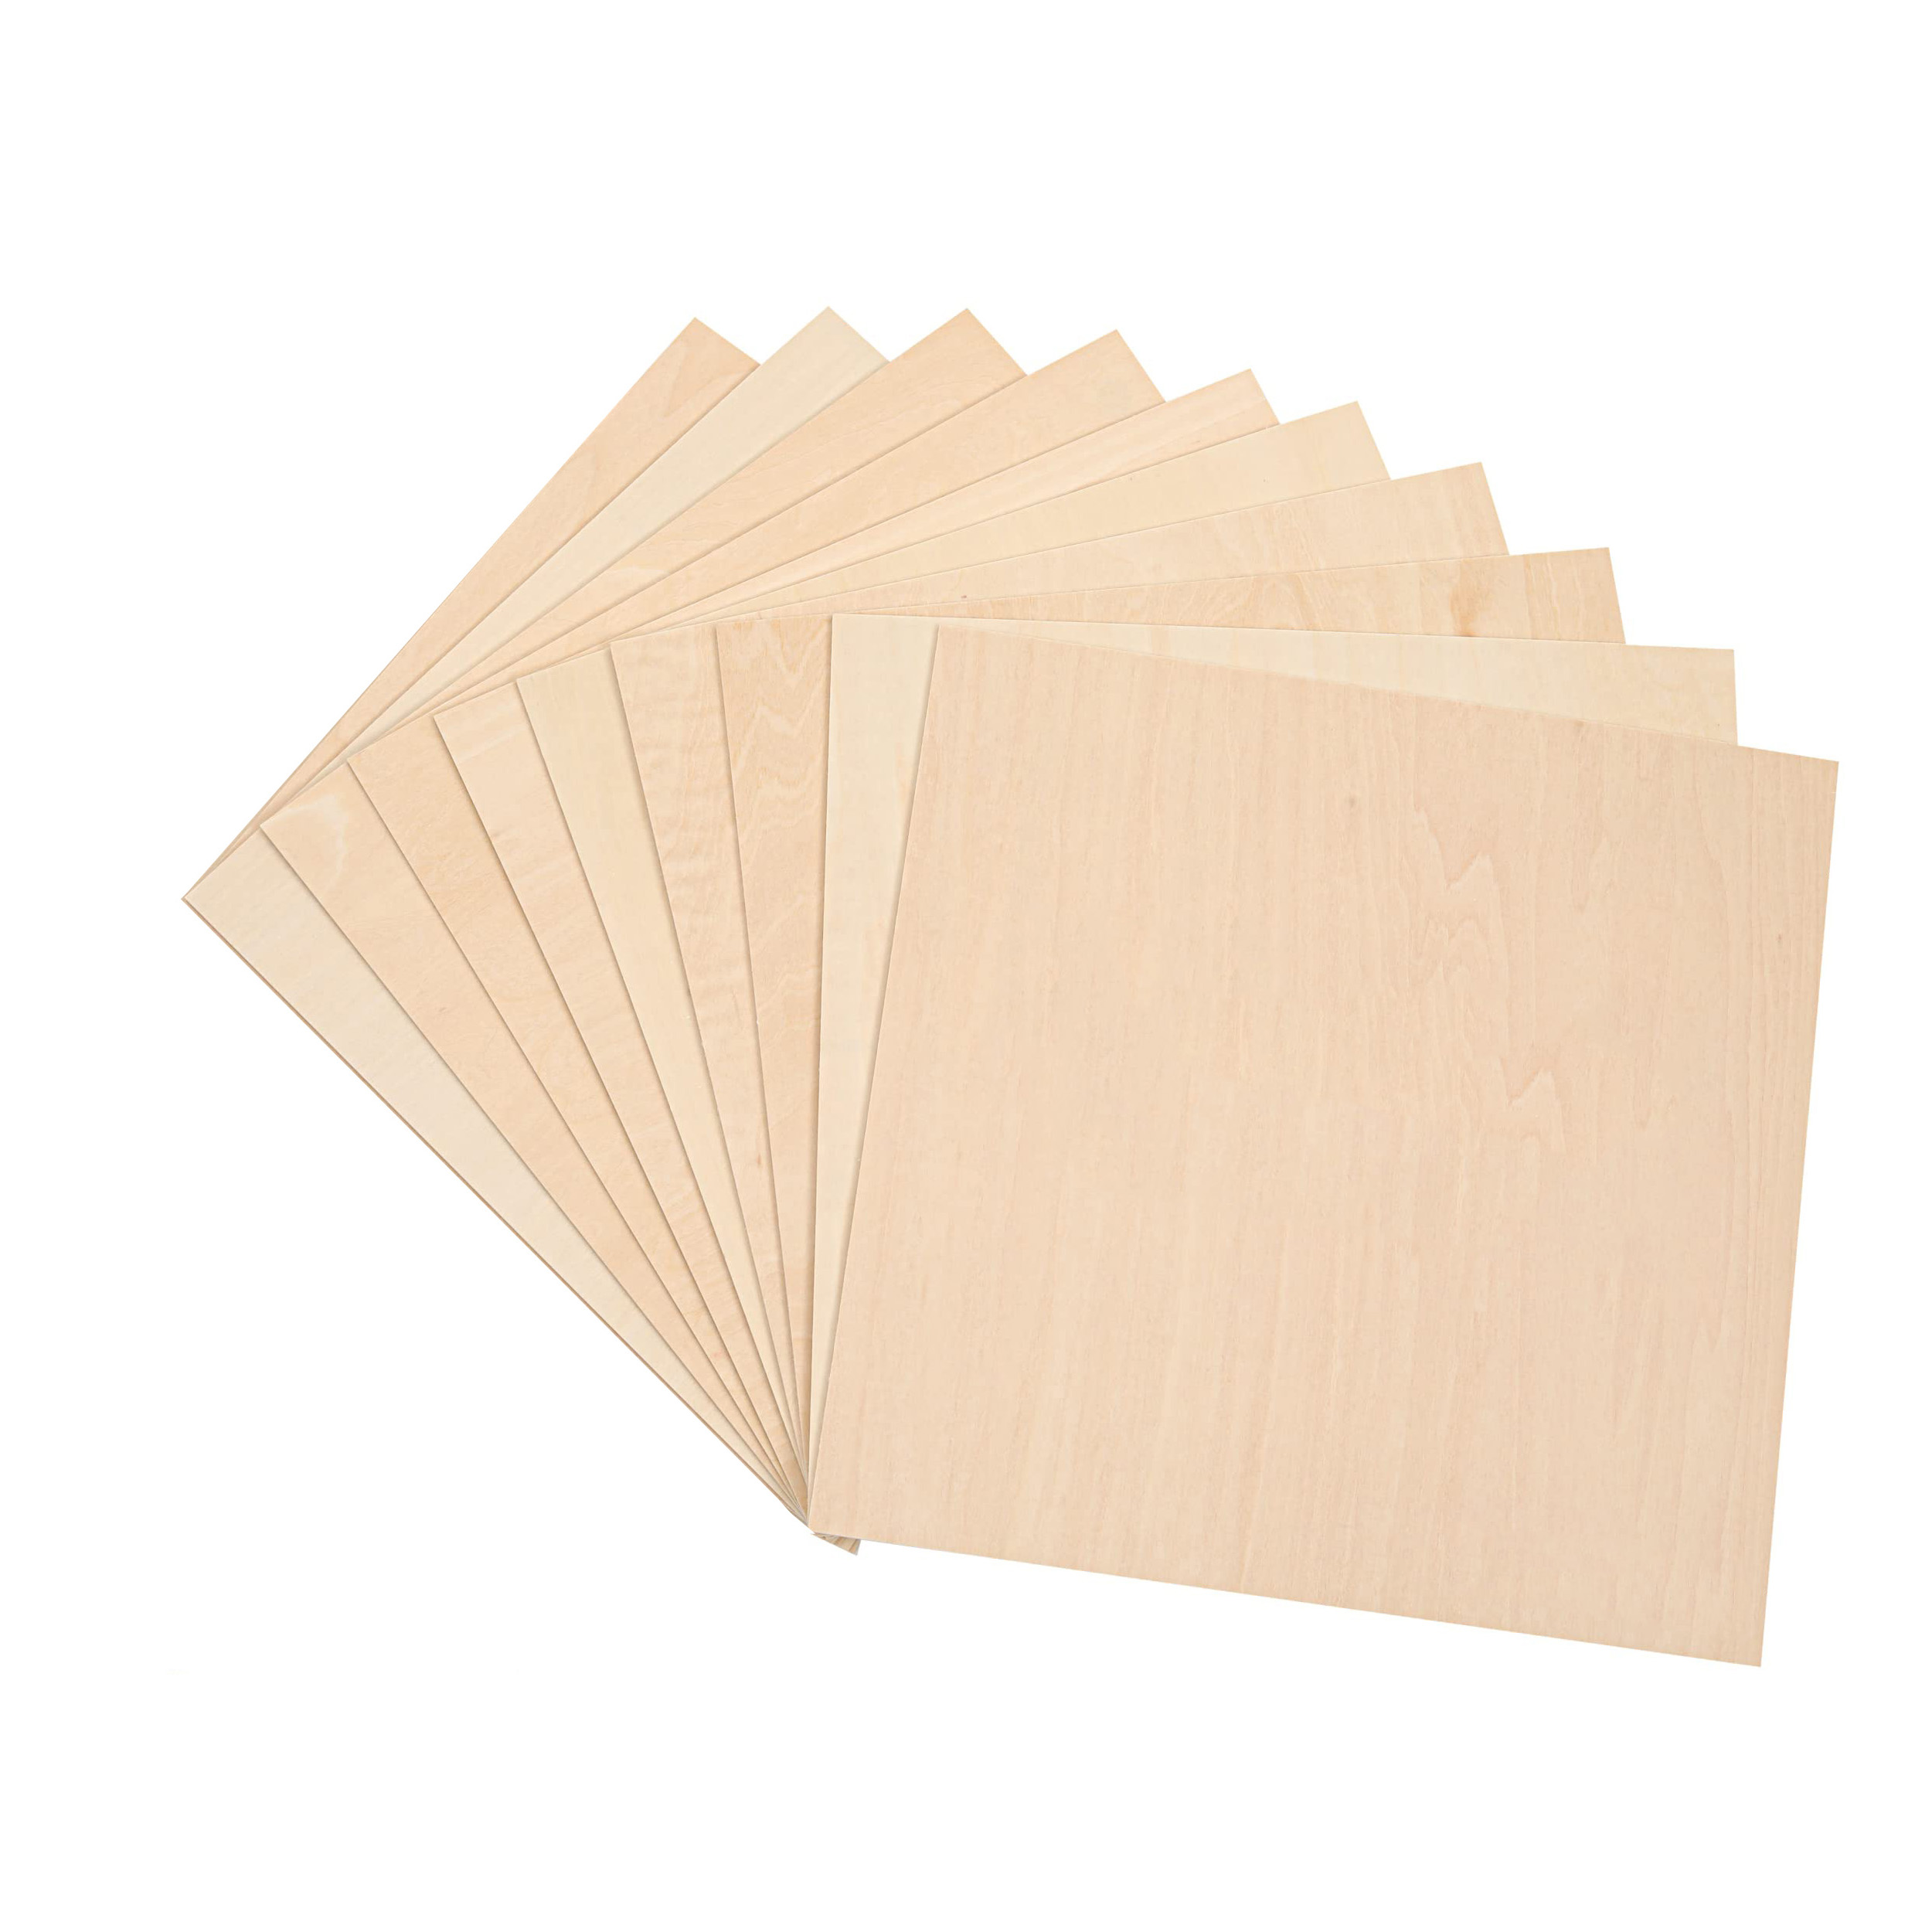  (12-Pack) 10”x10”x1/8” Balsa Sheets for Crafts - Perfect for  Architectural Models Drawing, Painting Wood, Engraving Wood, Burning,  Laser, Scroll Sawing